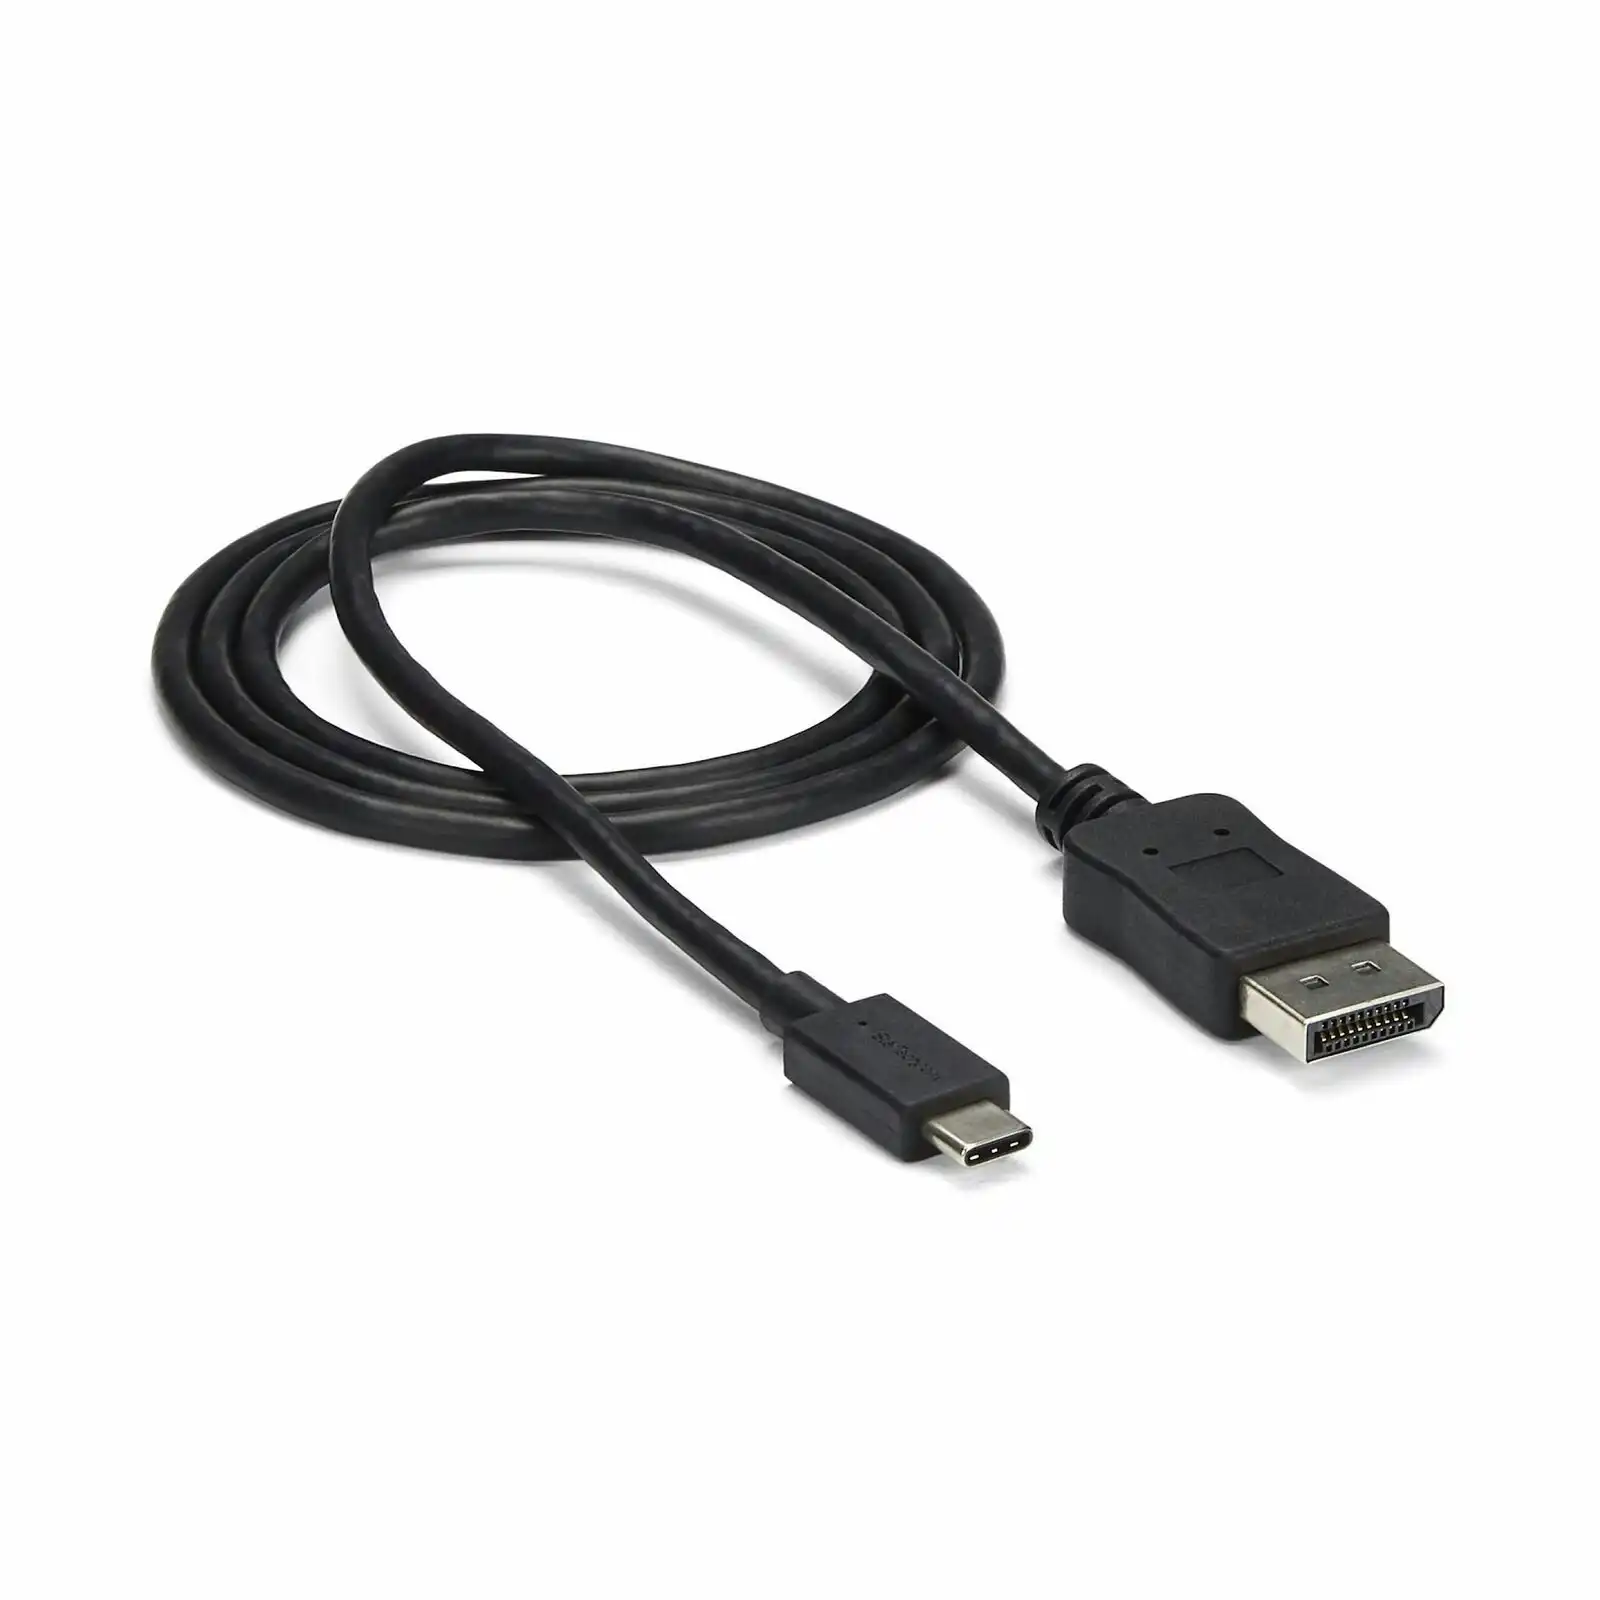 Star Tech 1m USB C To DisplayPort 1.2 Cable 4K/60Hz 21.6Gbps BLK For Windows/Mac